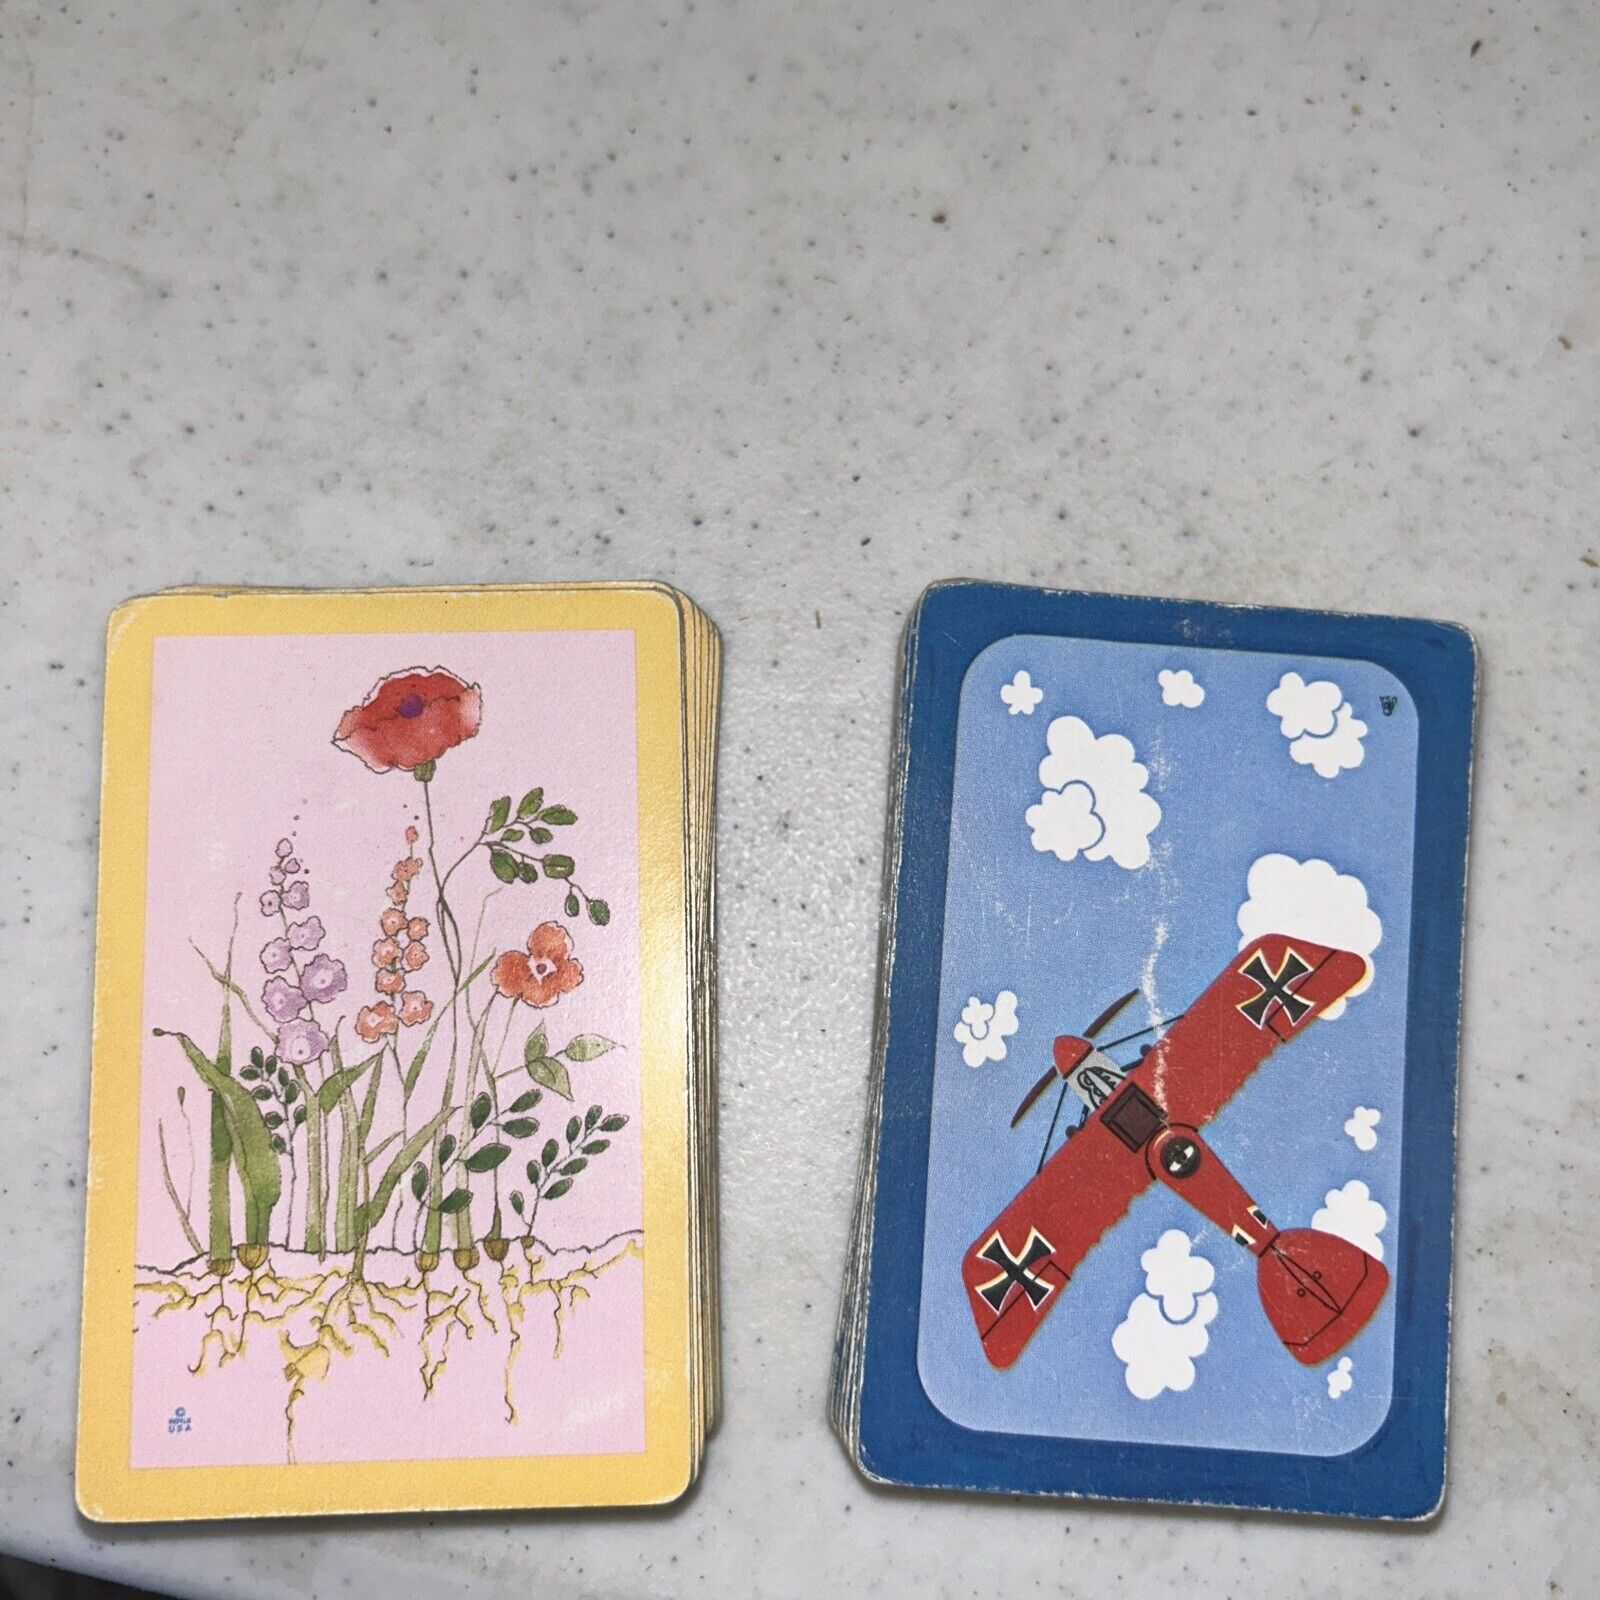 2 Vintage Decks Trump  Playing Cards Floral & Airplane  Crafts Red Baron